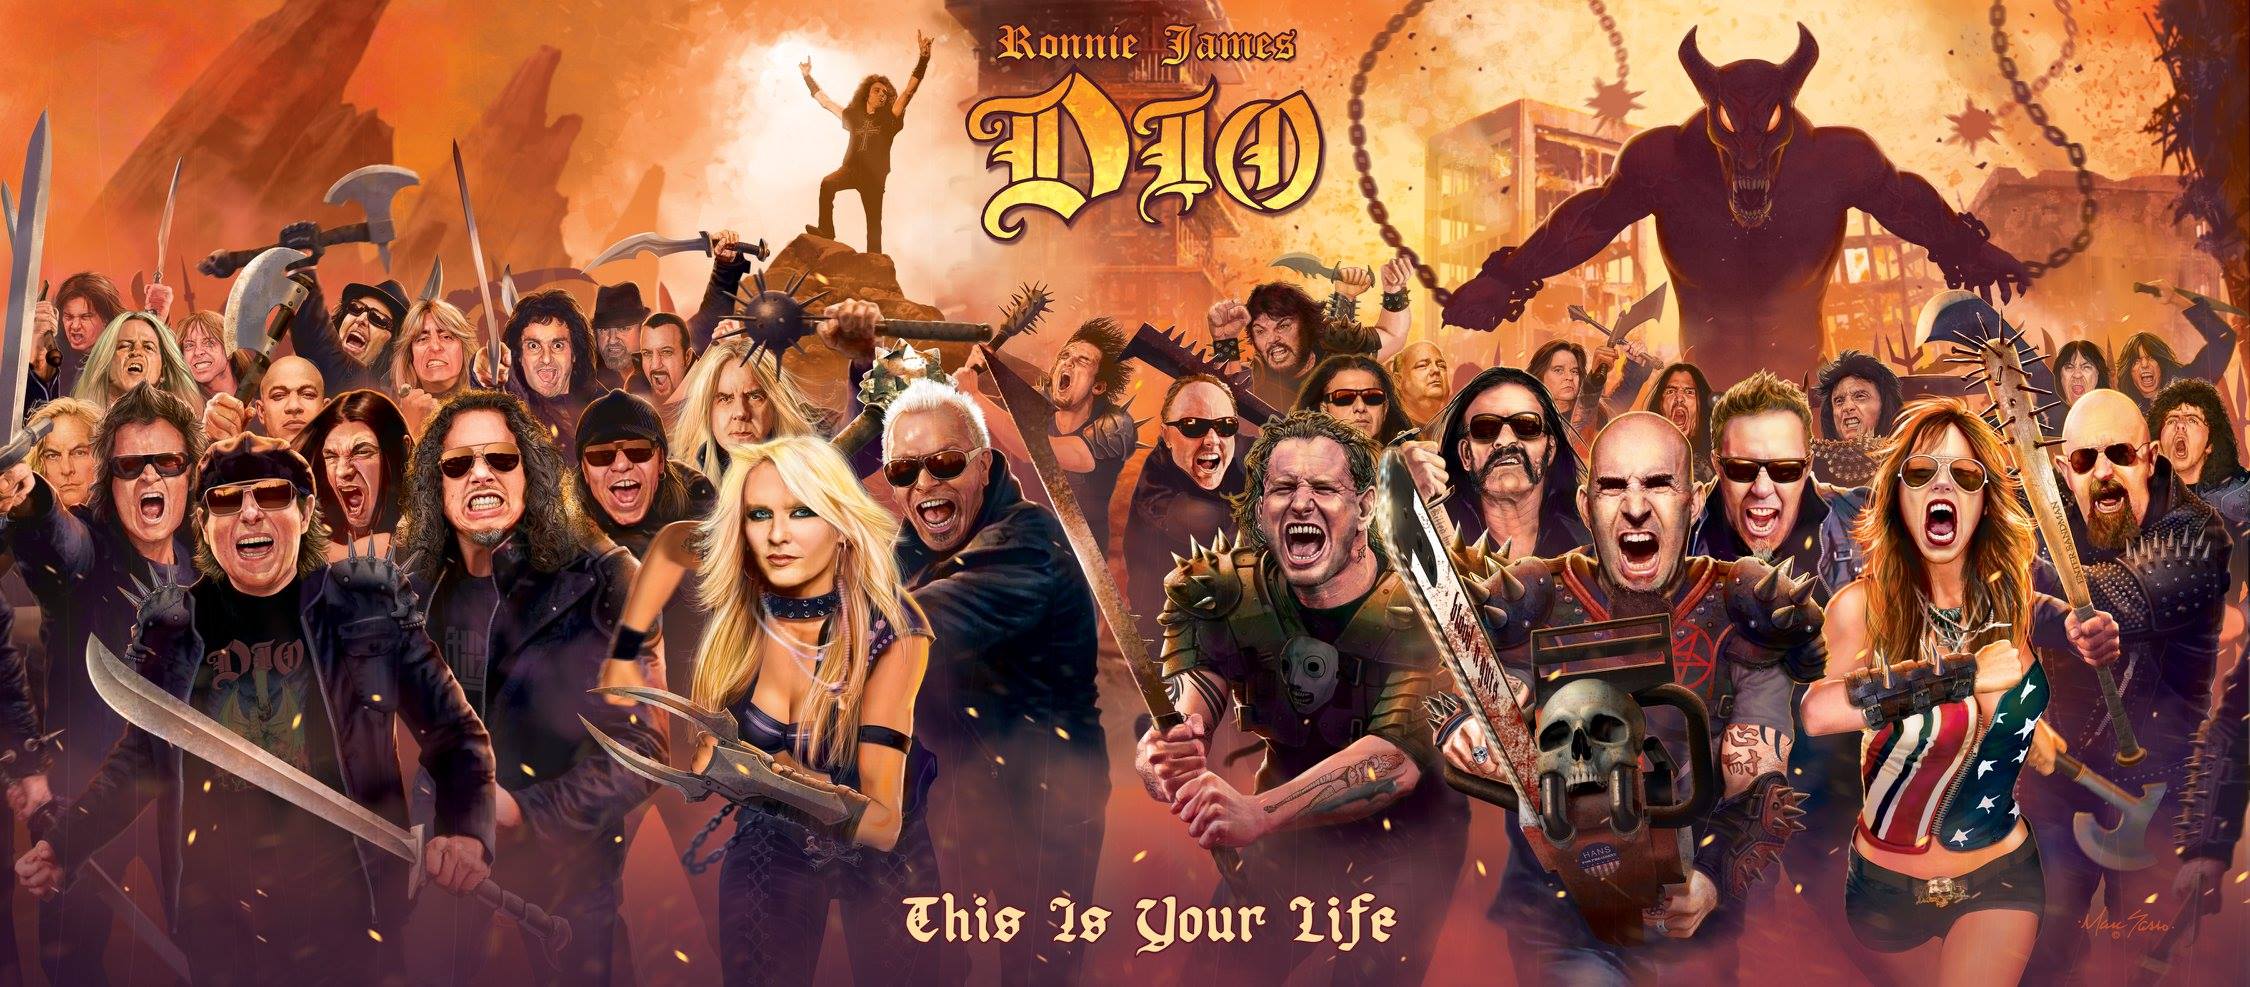 ronnie-james-dio-this-is-your-life.jpg